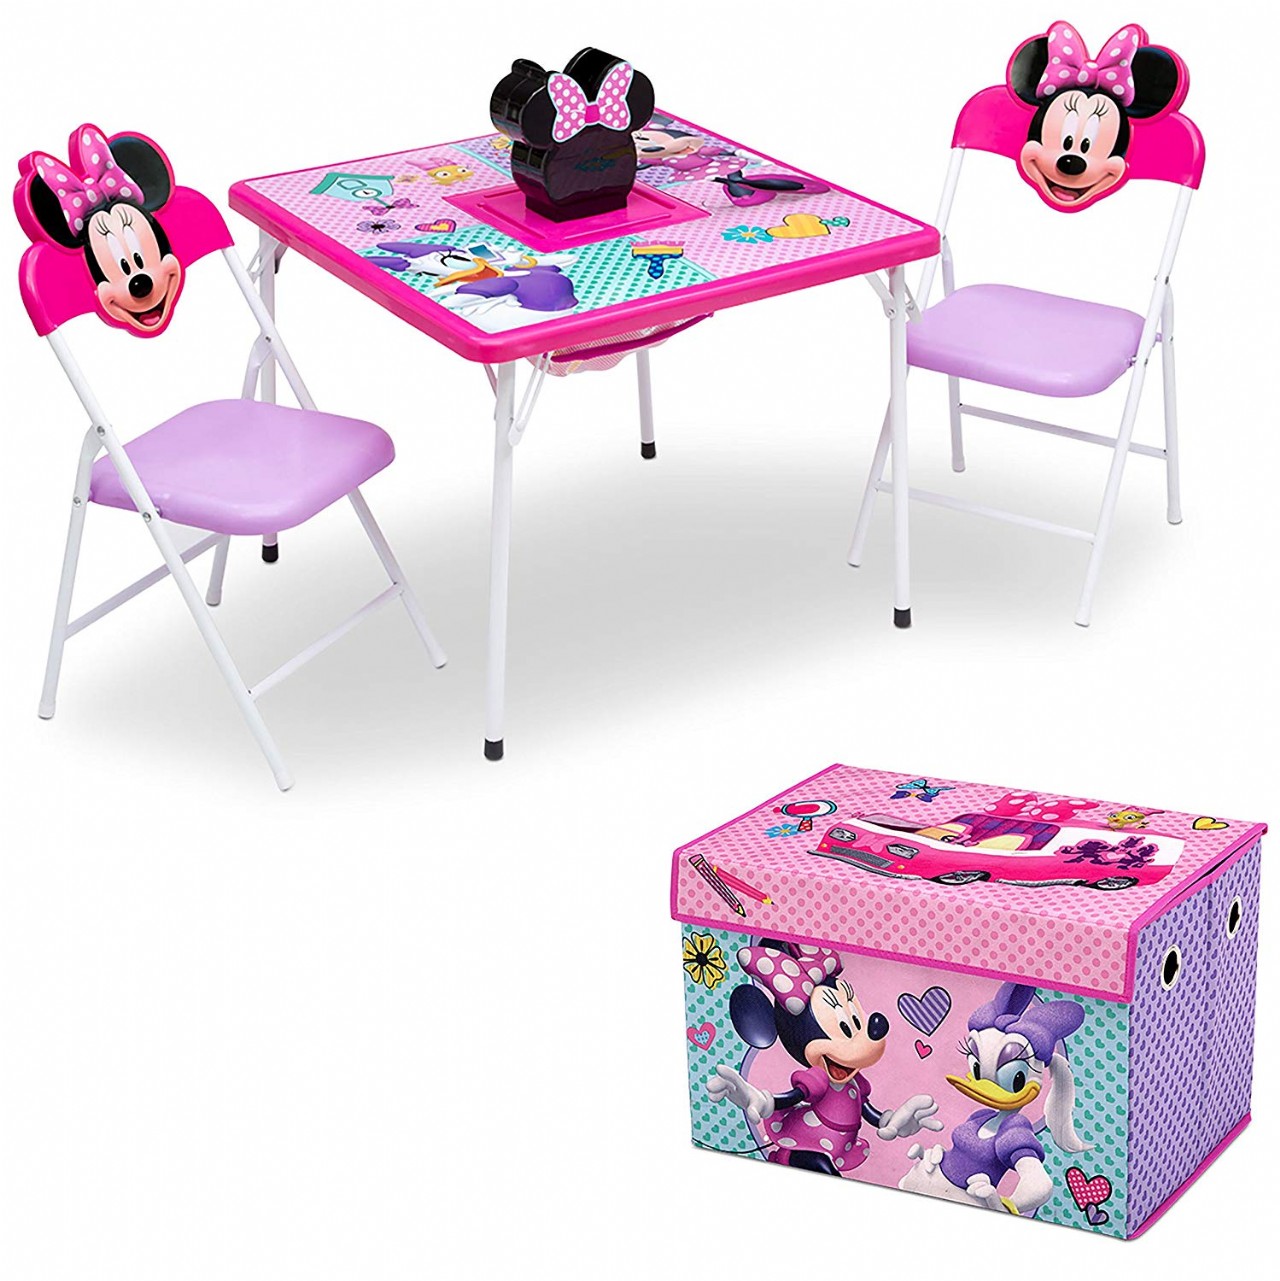 4-Piece Kids Furniture Set (2 Chairs and Table Set & Fabric Toy Box), Disney Minnie Mouse